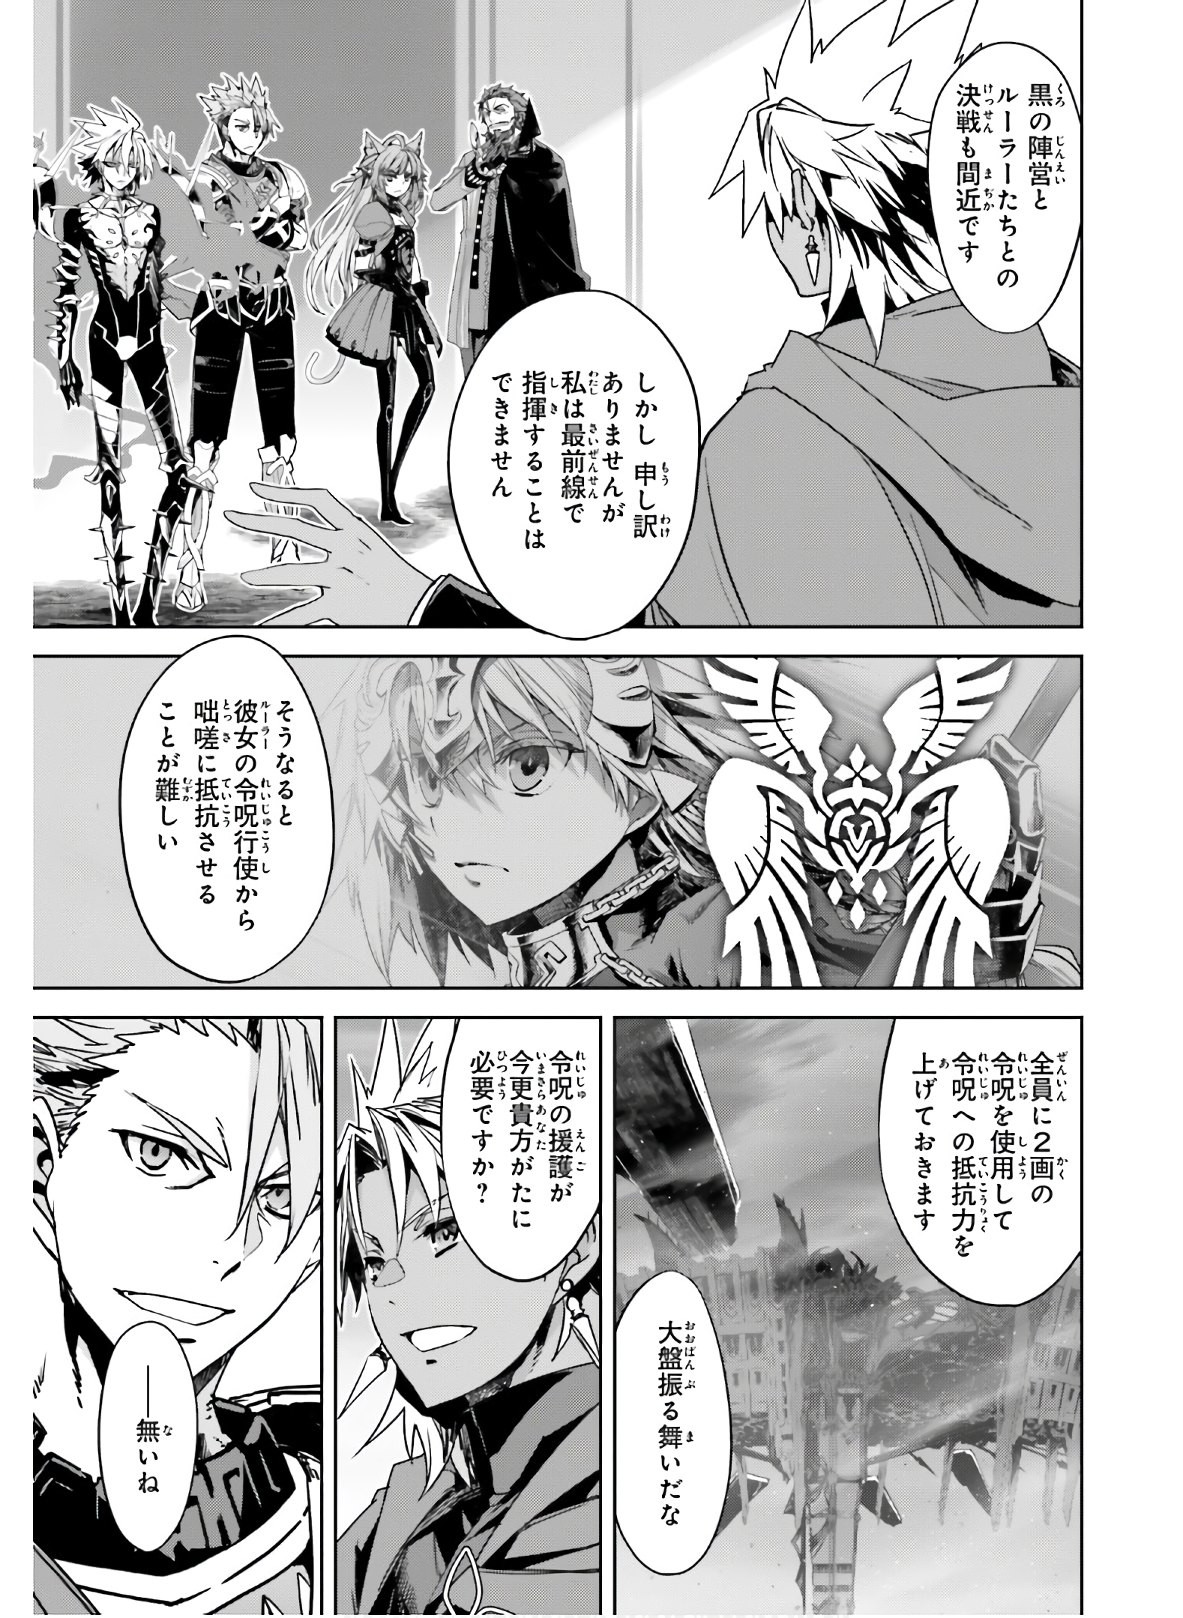 Fate-Apocrypha - Chapter 52 - Page 3